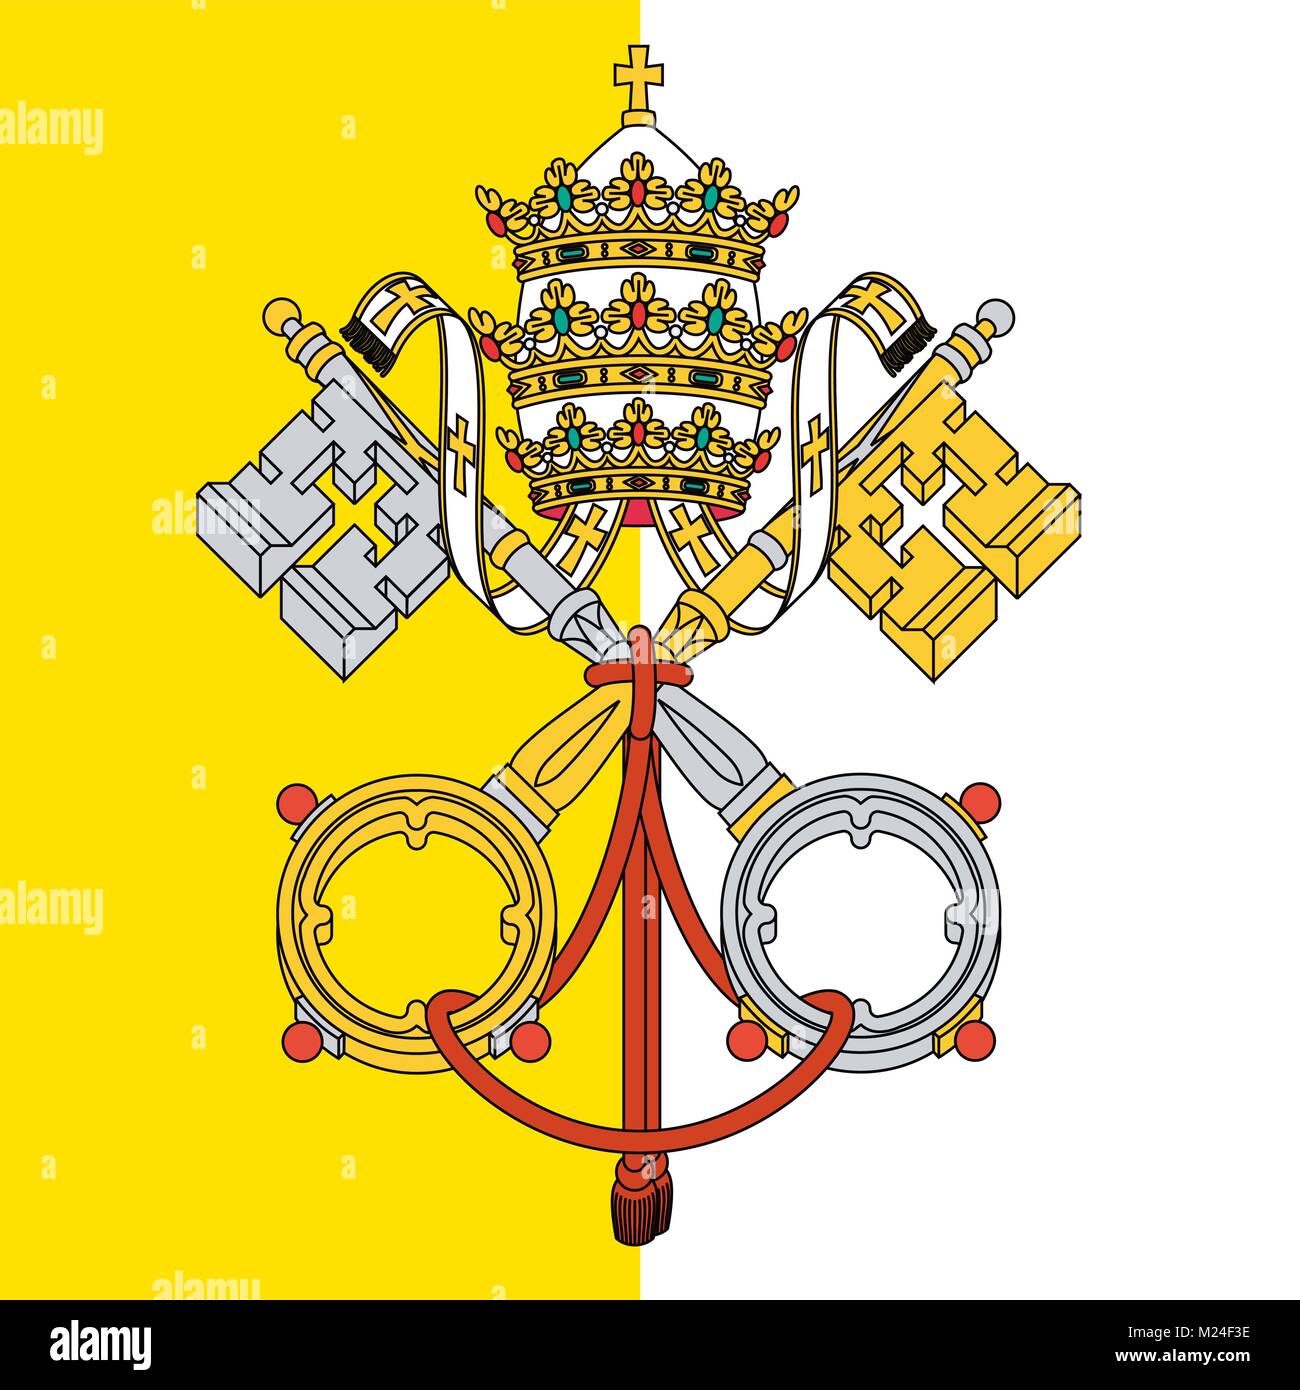 Vatican City, Holy See,  coat of arms and flag, official symbols of the country Stock Vector